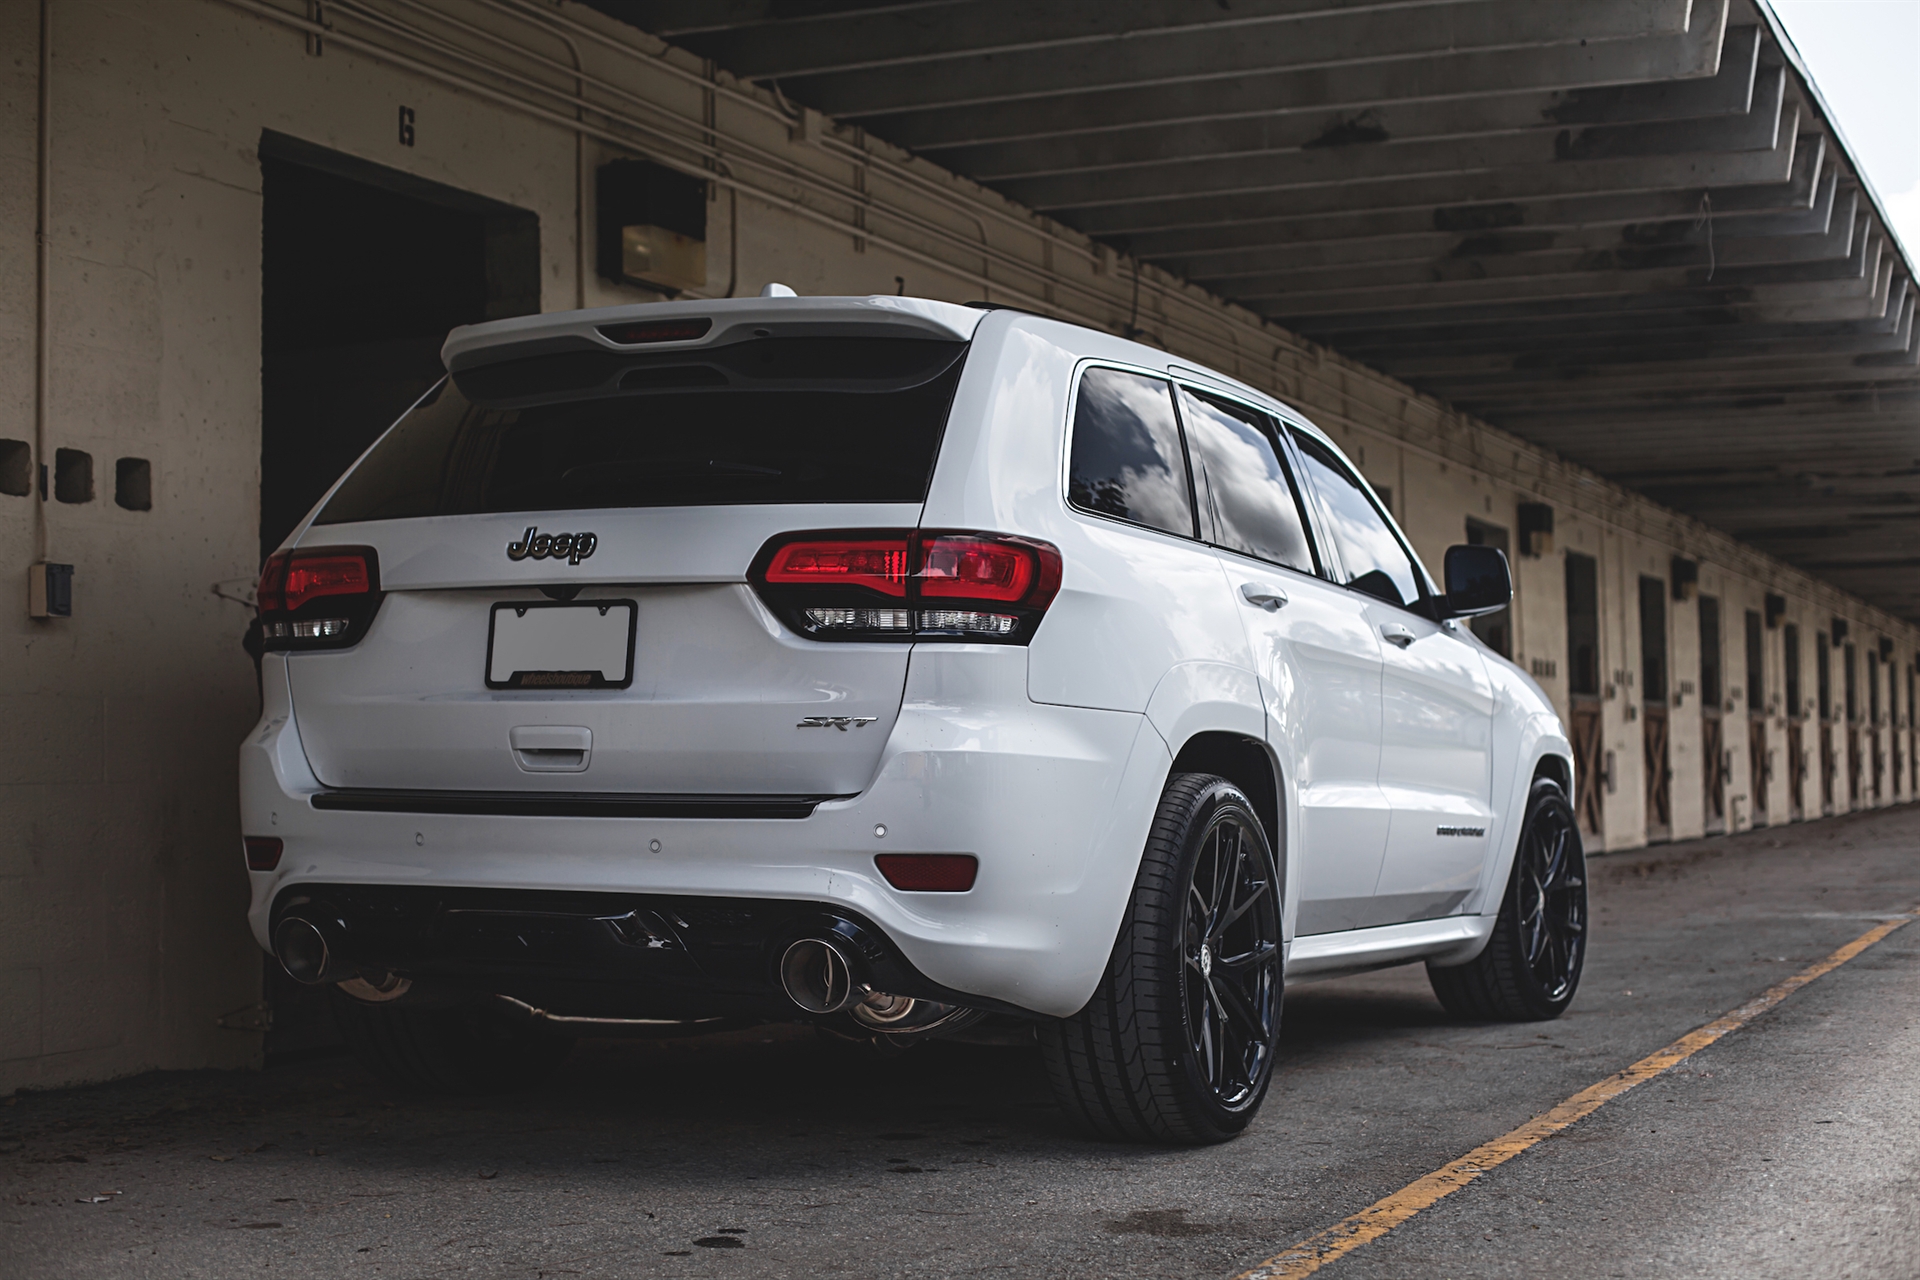 Jeep Grand Cherokee SRT8 on HRE P101 Gallery | Wheels Boutique 2001 Jeep Grand Cherokee 4.0 Towing Capacity